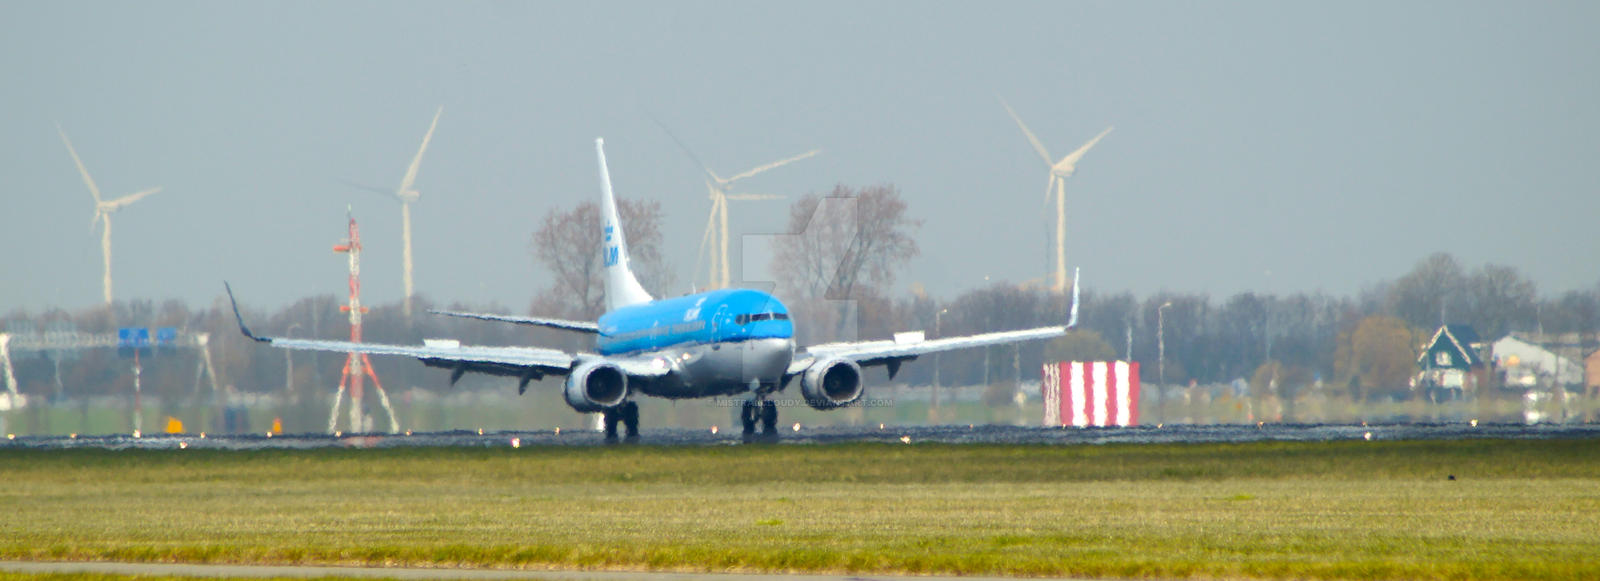 KLM from more nearby